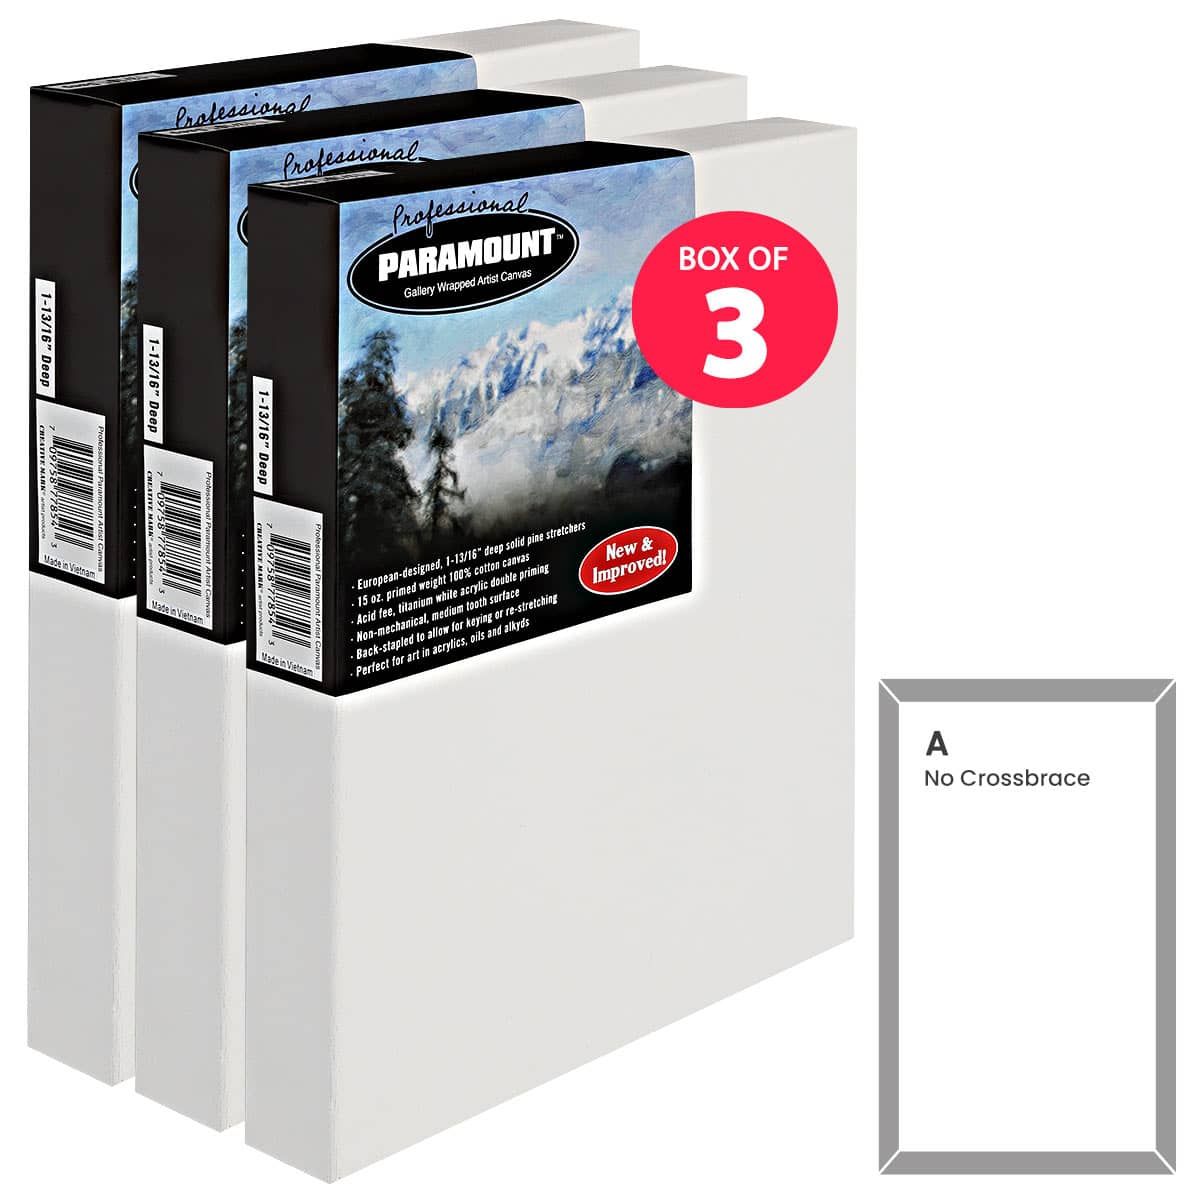 Canvases for Painting, Pack of 8, 12 X 12 Inches, Square White Stretched  Canvas Bulk, 100% Cotton, 8 Oz Gesso-Primed, Art Supplies for Adults and